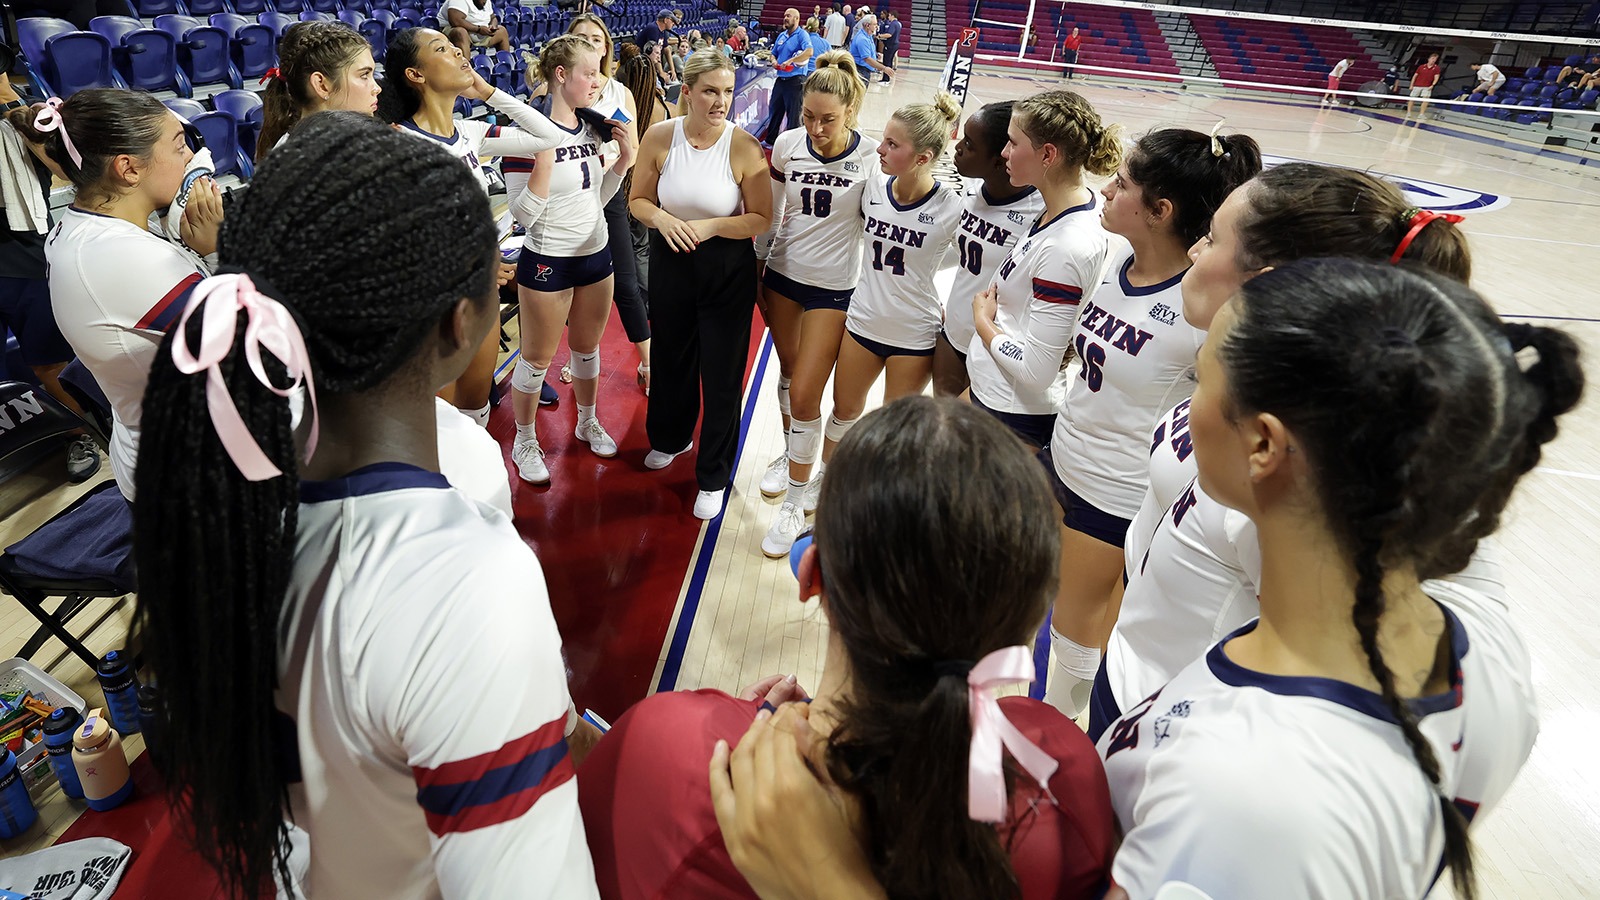 Members of the volleyball team stand in a huddle and listen to their coach.